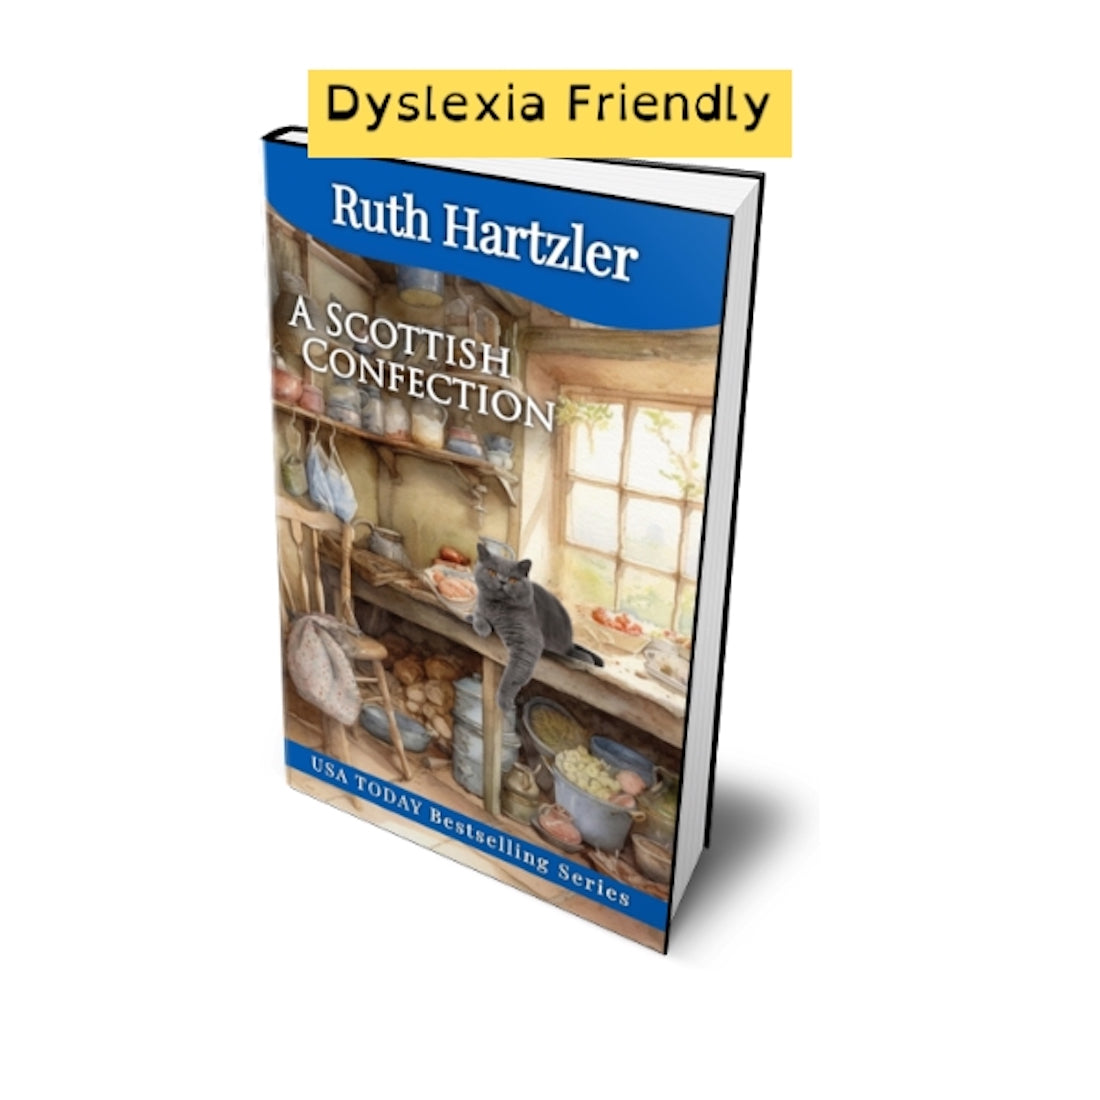 A Scottish Confection Dyslexia Friendly cozy mystery by ruth hartzler